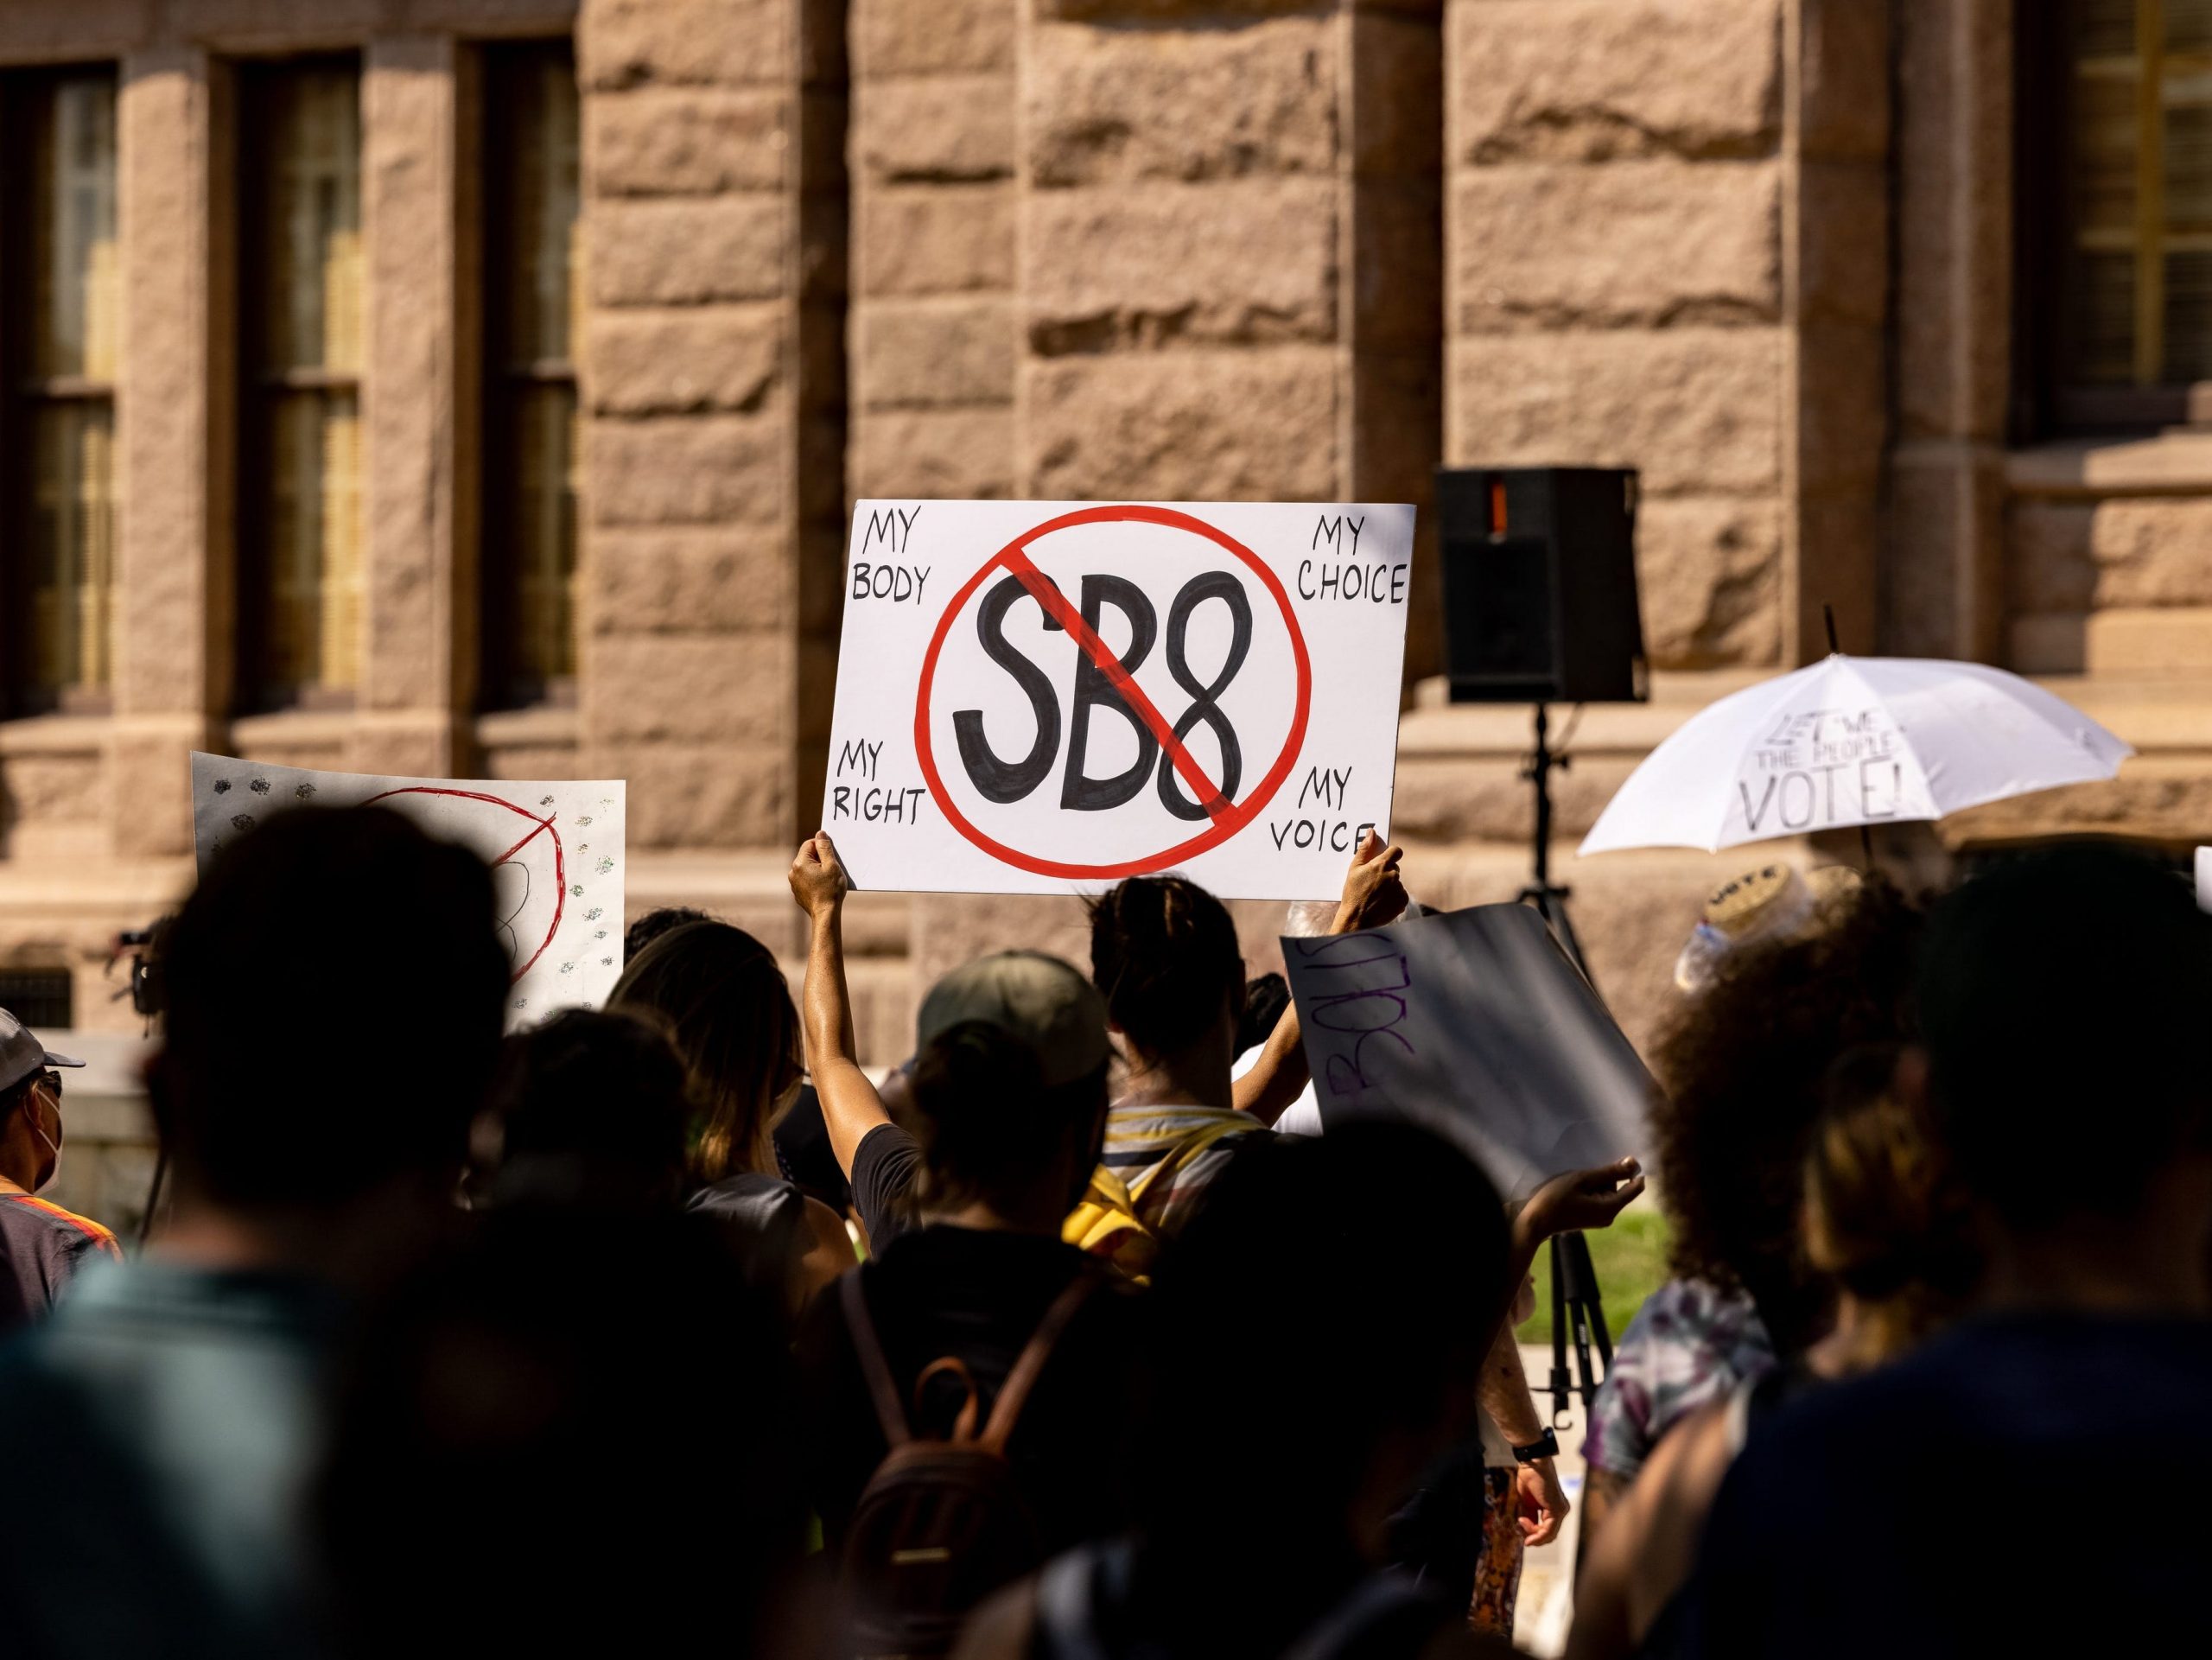 Abortion rights activists rally at the Texas State Capitol against SB 8, which prohibits abortions in Texas after a fetal heartbeat is detected on an ultrasound, on September 11, 2021 in Austin, Texas.